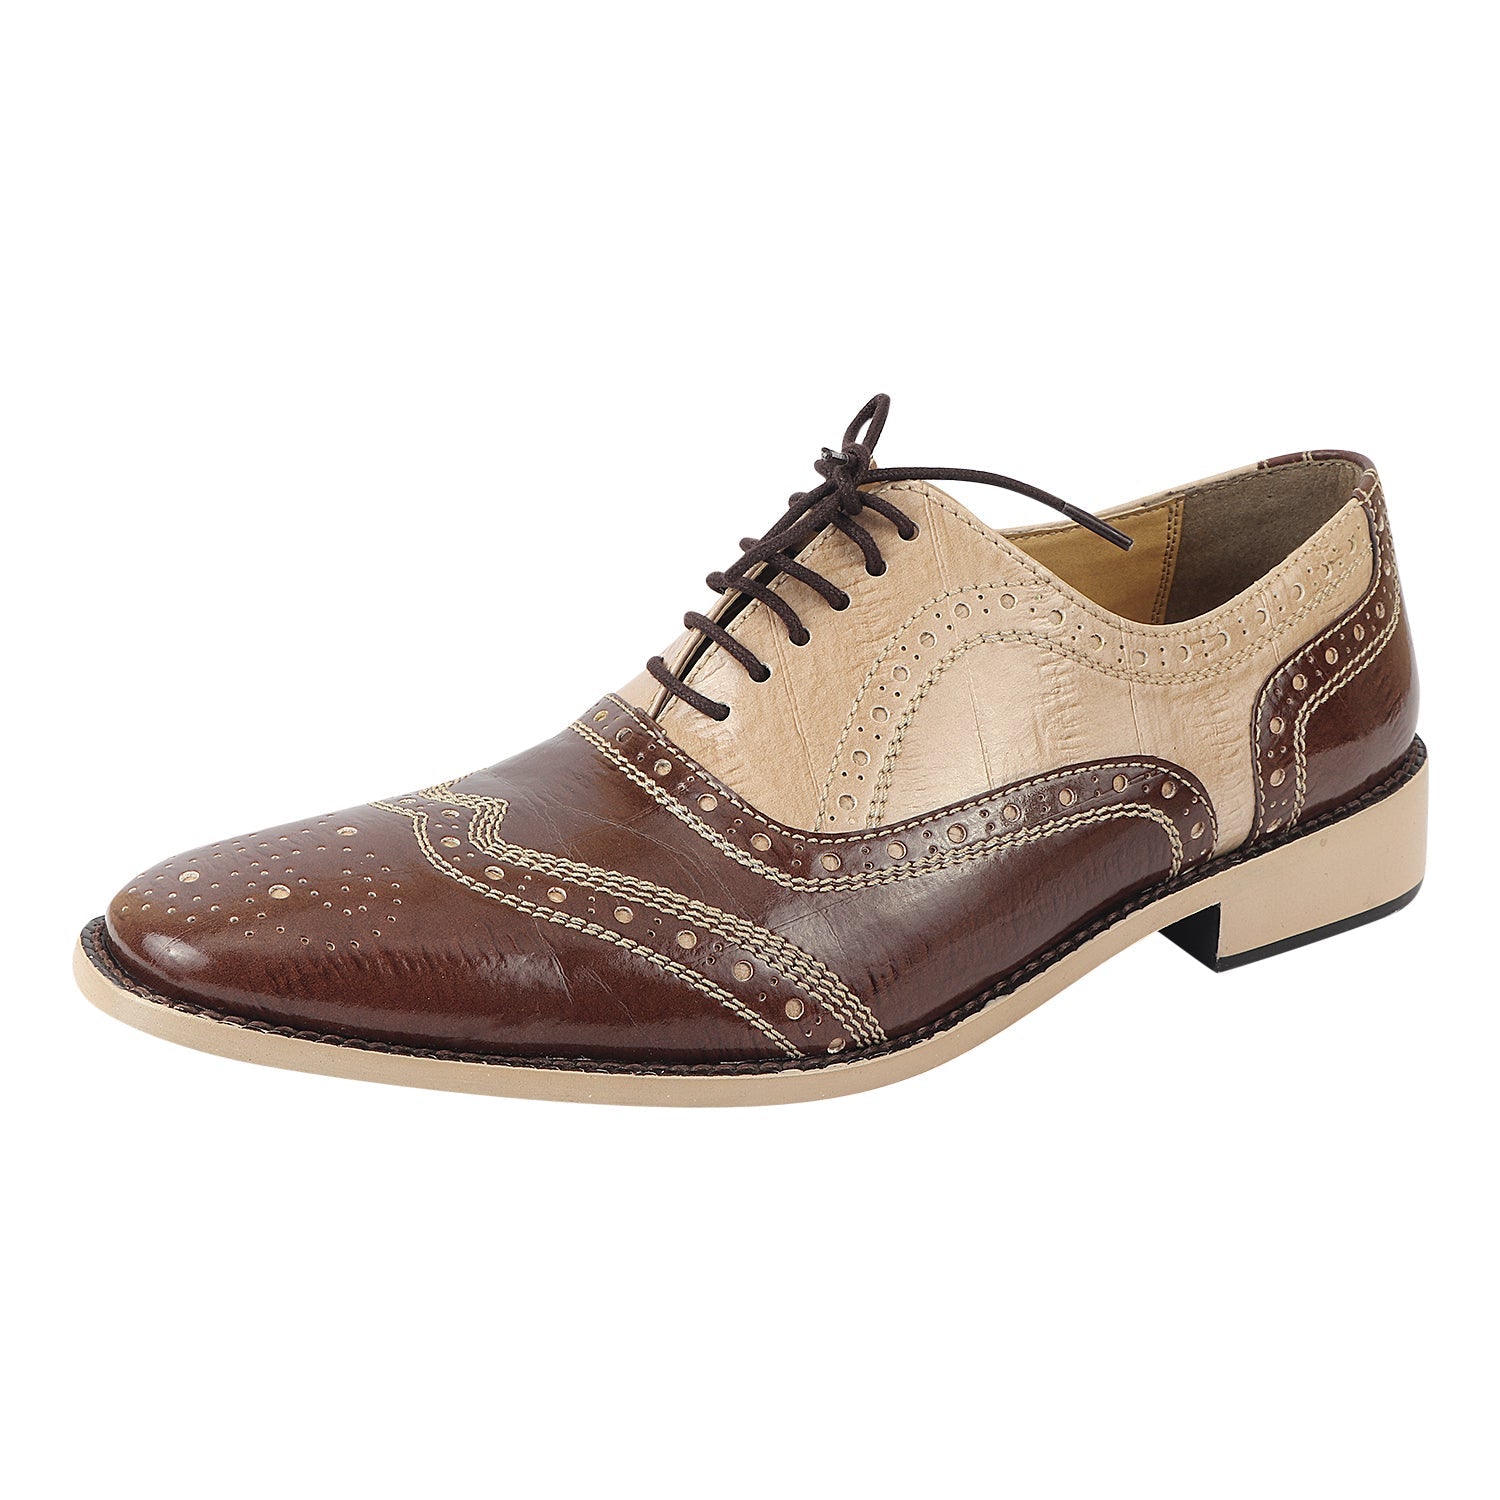 Tremont Genuine Leather Oxford Style Brogue Dress Shoes